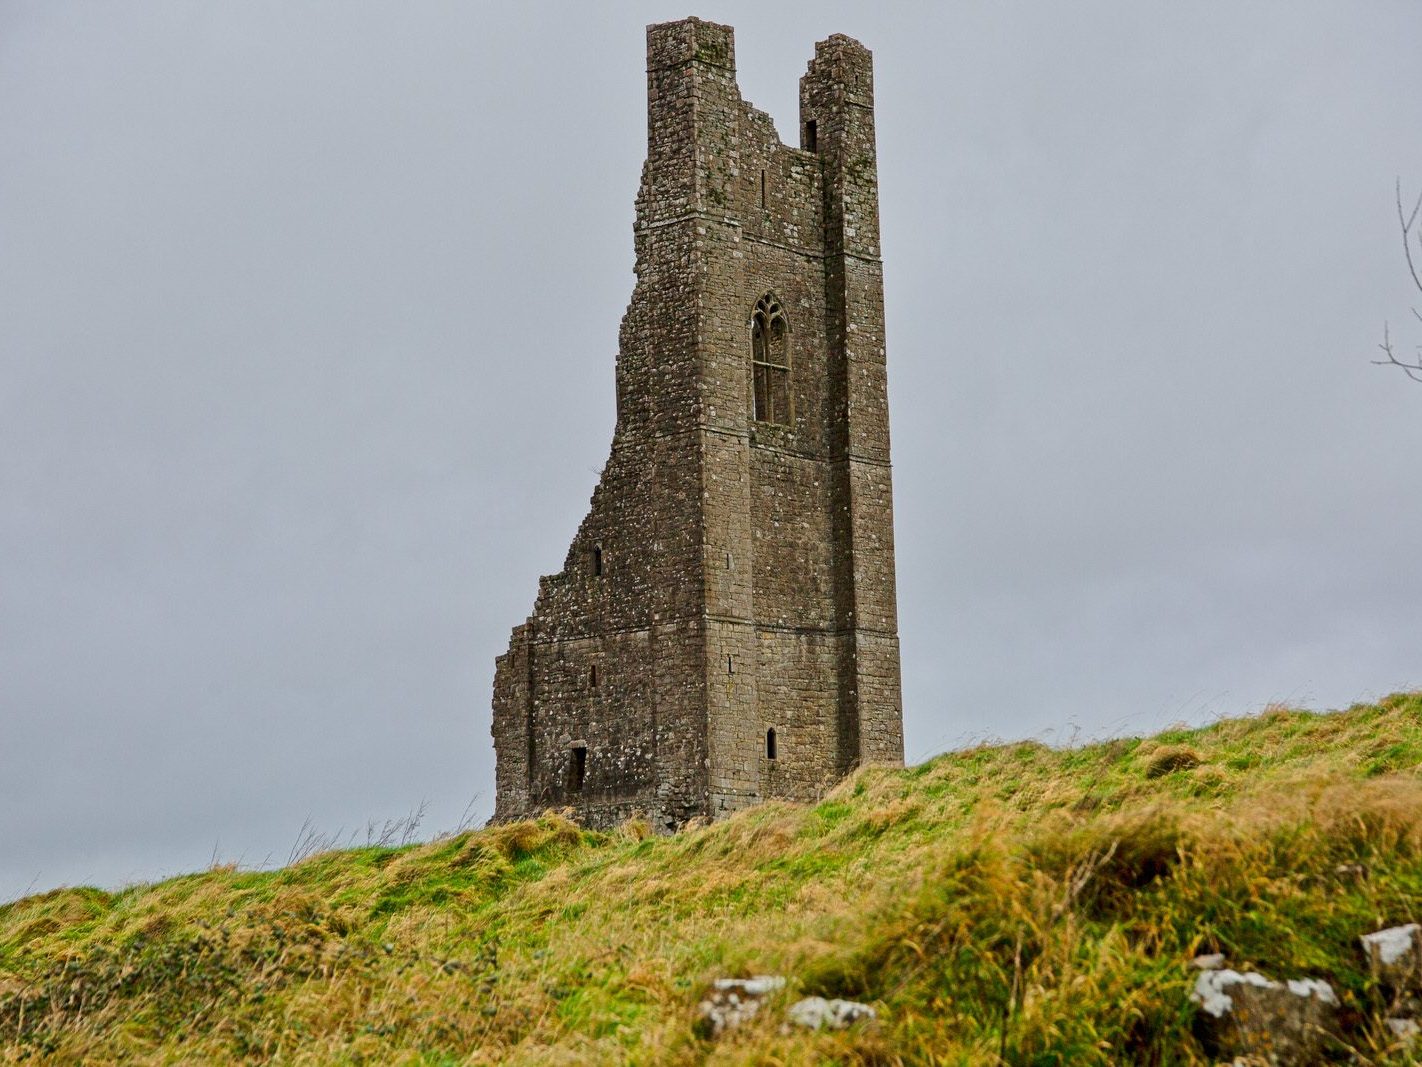 THE YELLOW STEEPLE DOMINATES THE TOWN OF TRIM [ALSO KNOWN AS ST MARYS ABBEY]-226741-1